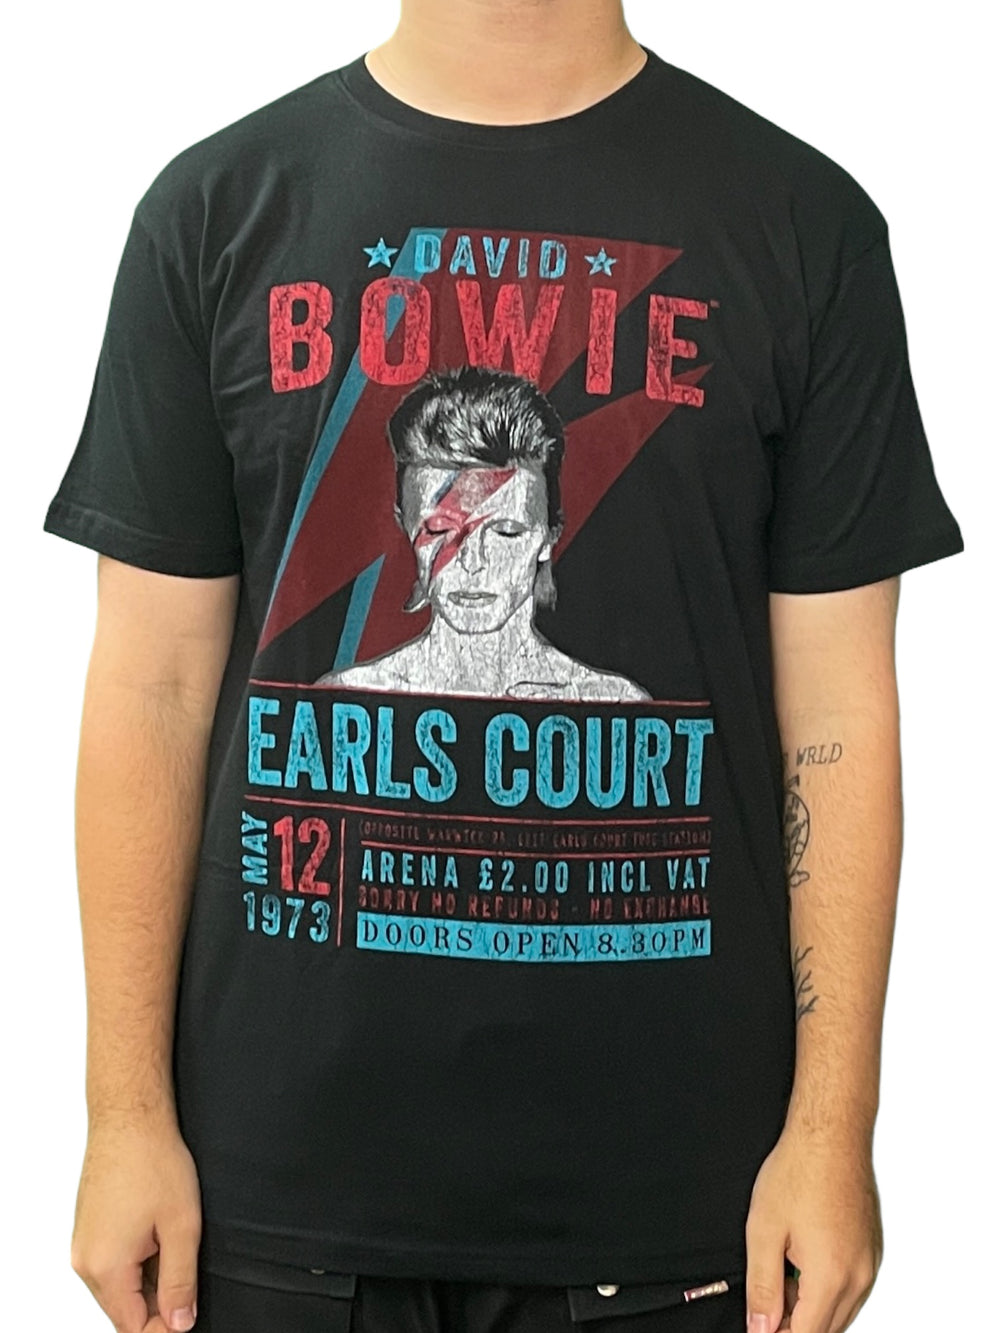 David Bowie - Earl's Court 1973 Official Unisex T Shirt Brand New Various Sizes